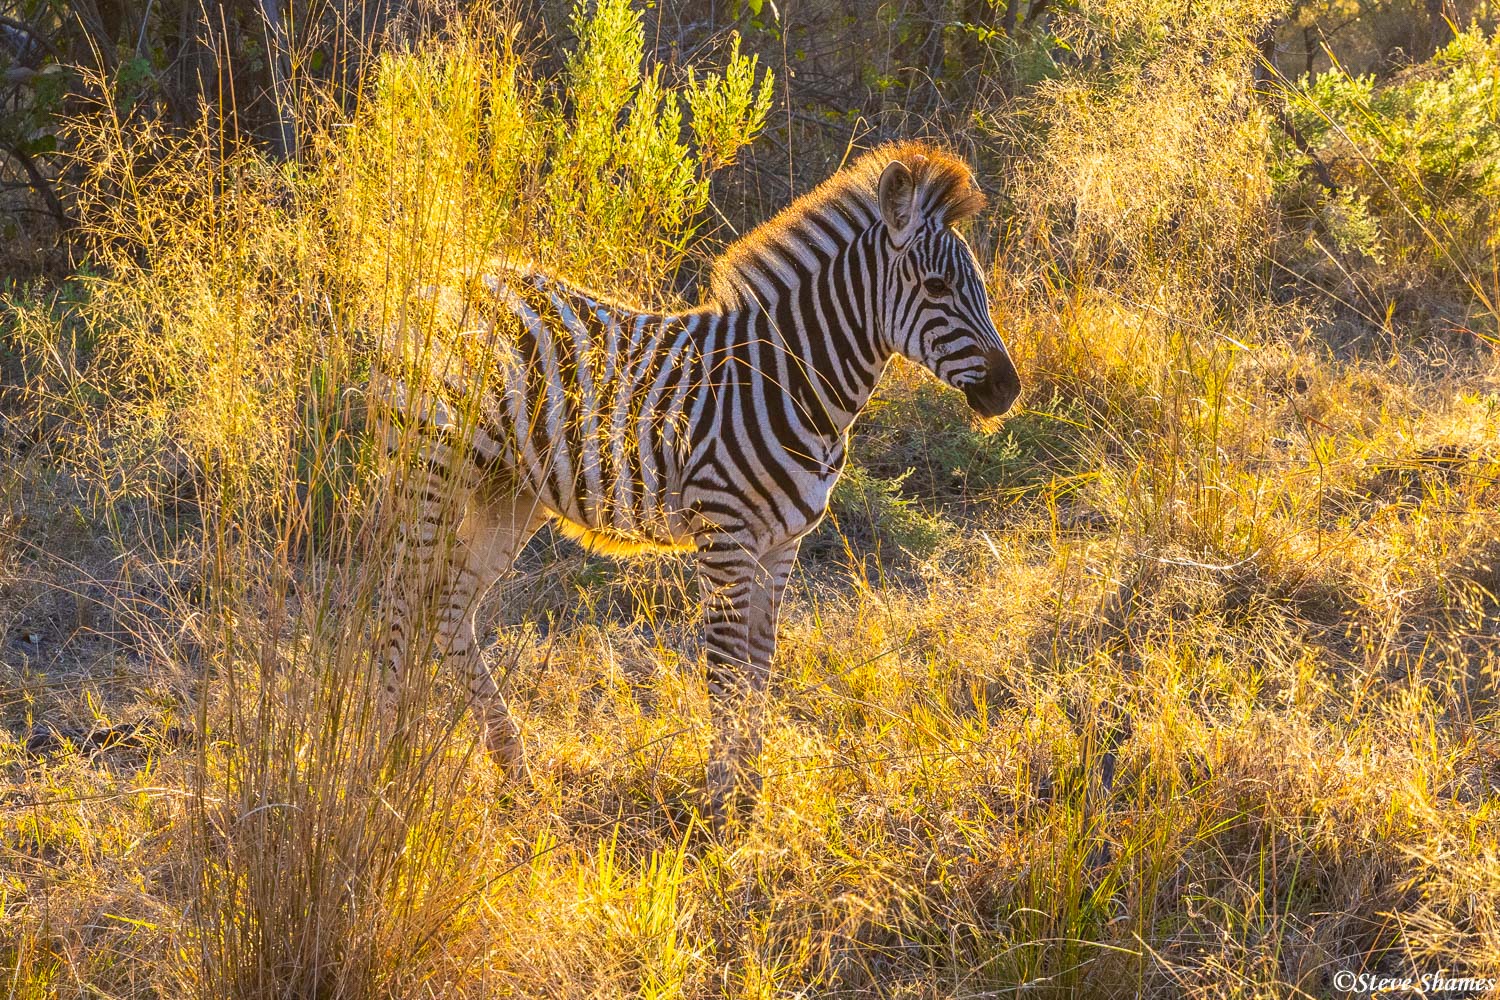 I like the way this young zebra looks in the early morning backlit grass.